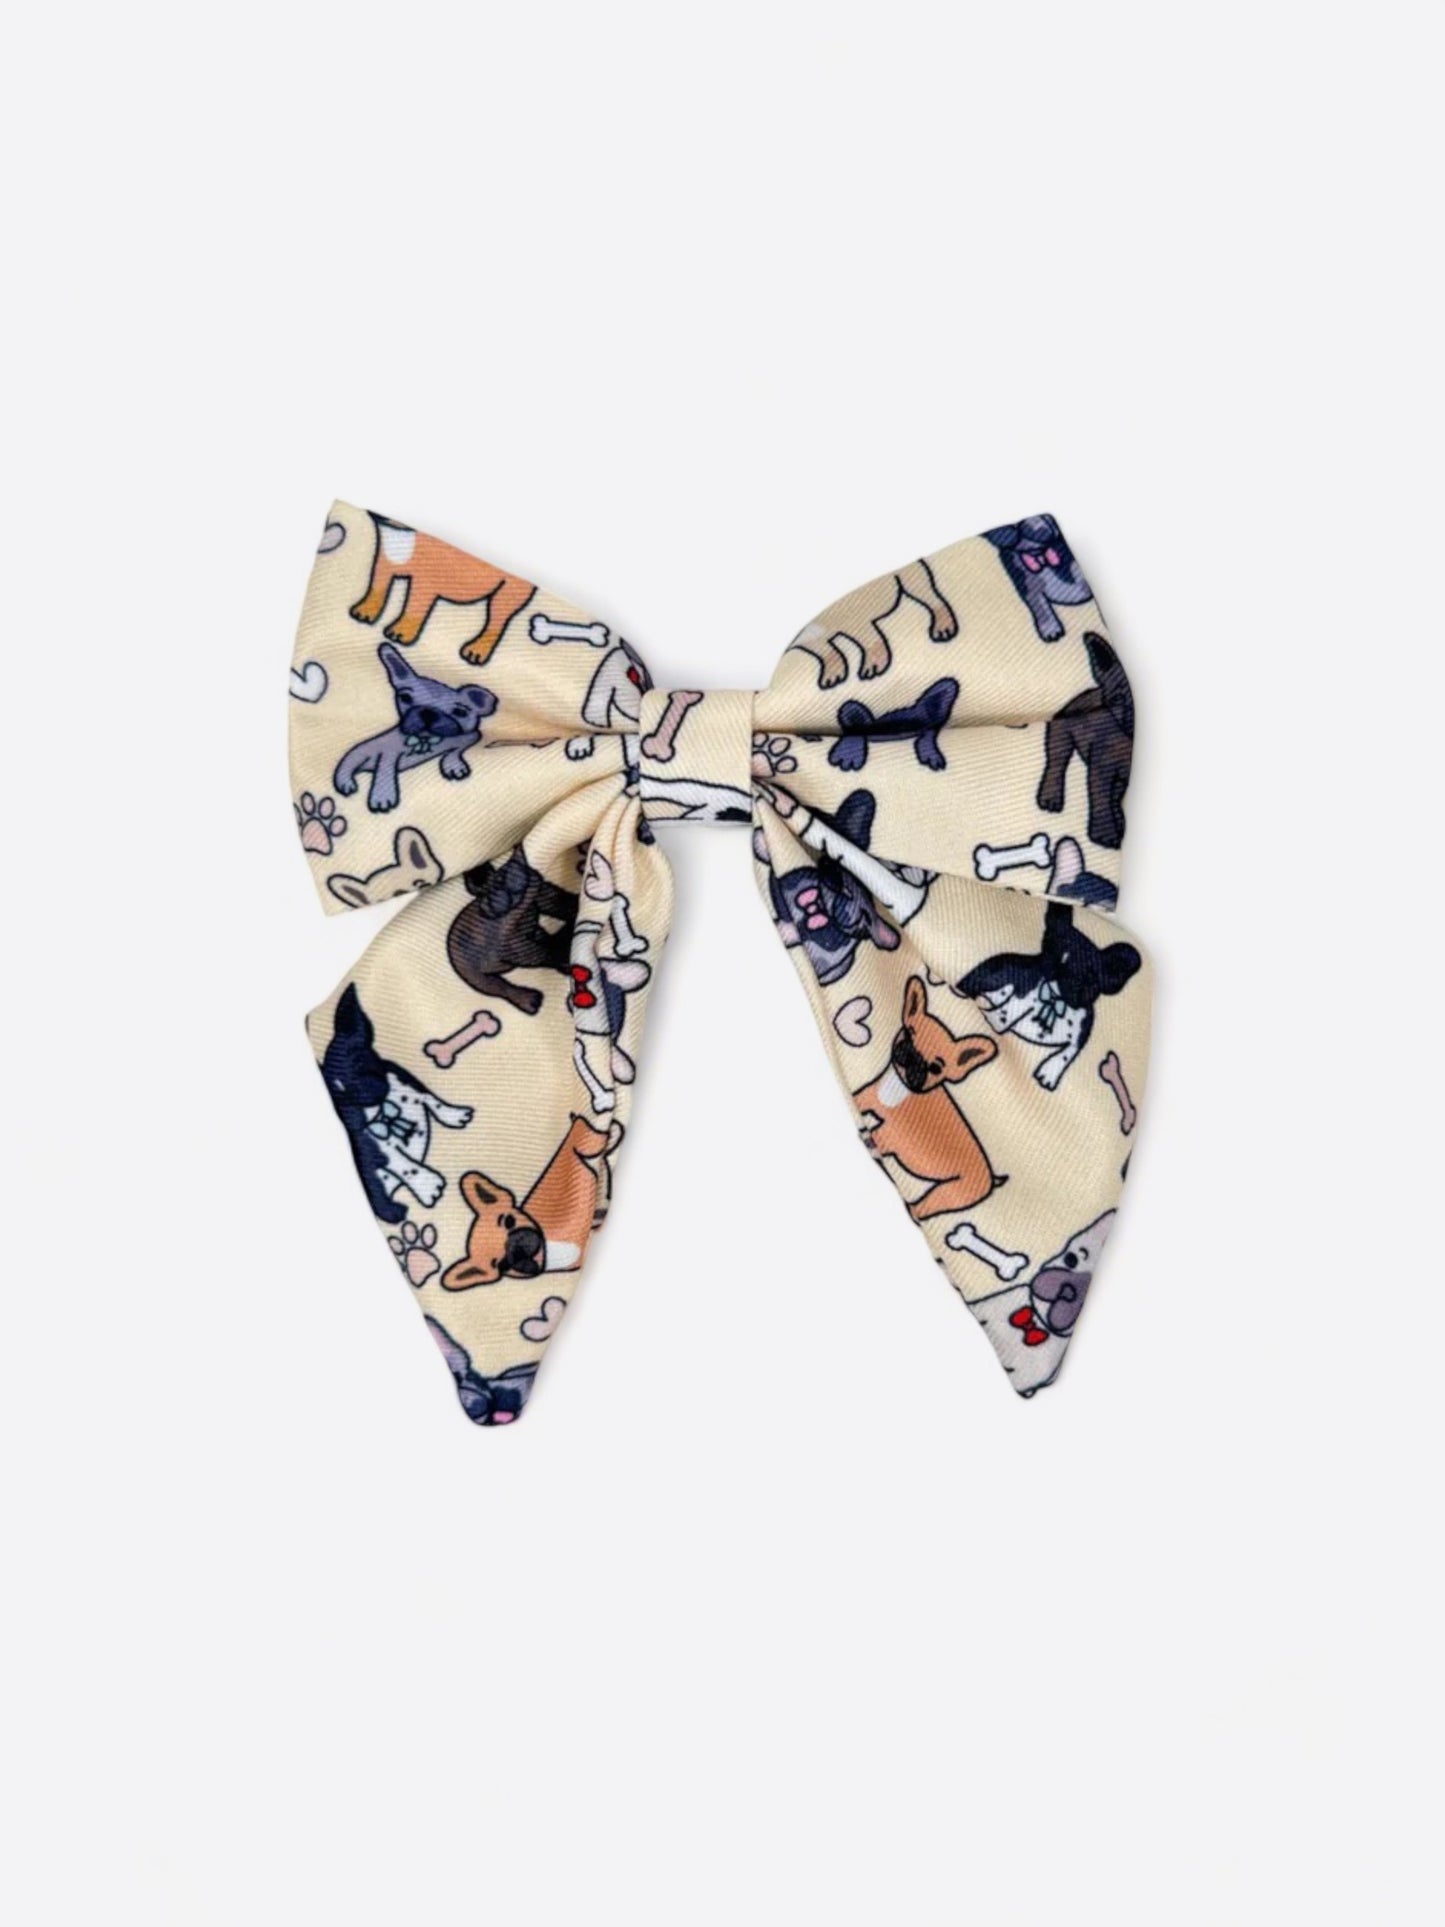 The French Bulldog Bow Tie